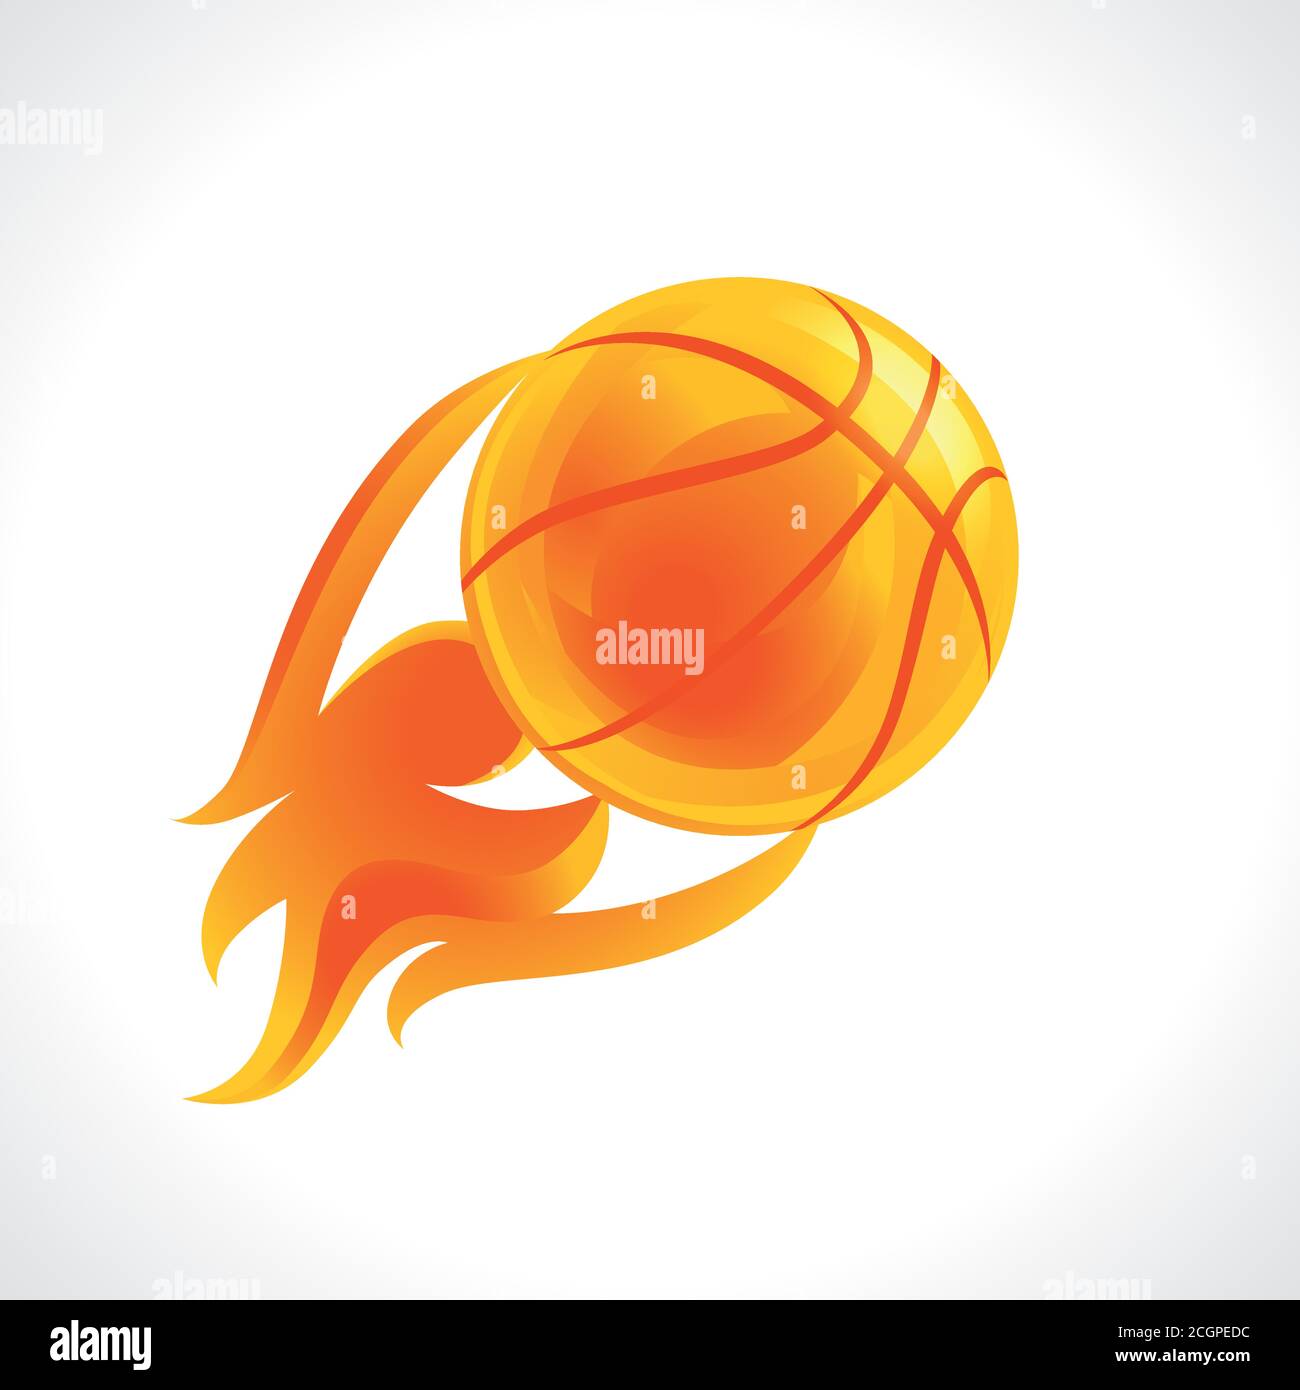 Basketball vector logo. Ball, fiery sportsman player sign. Brand symbol of national competitions, mobile app, sport equipment shop. Creative red award Stock Vector